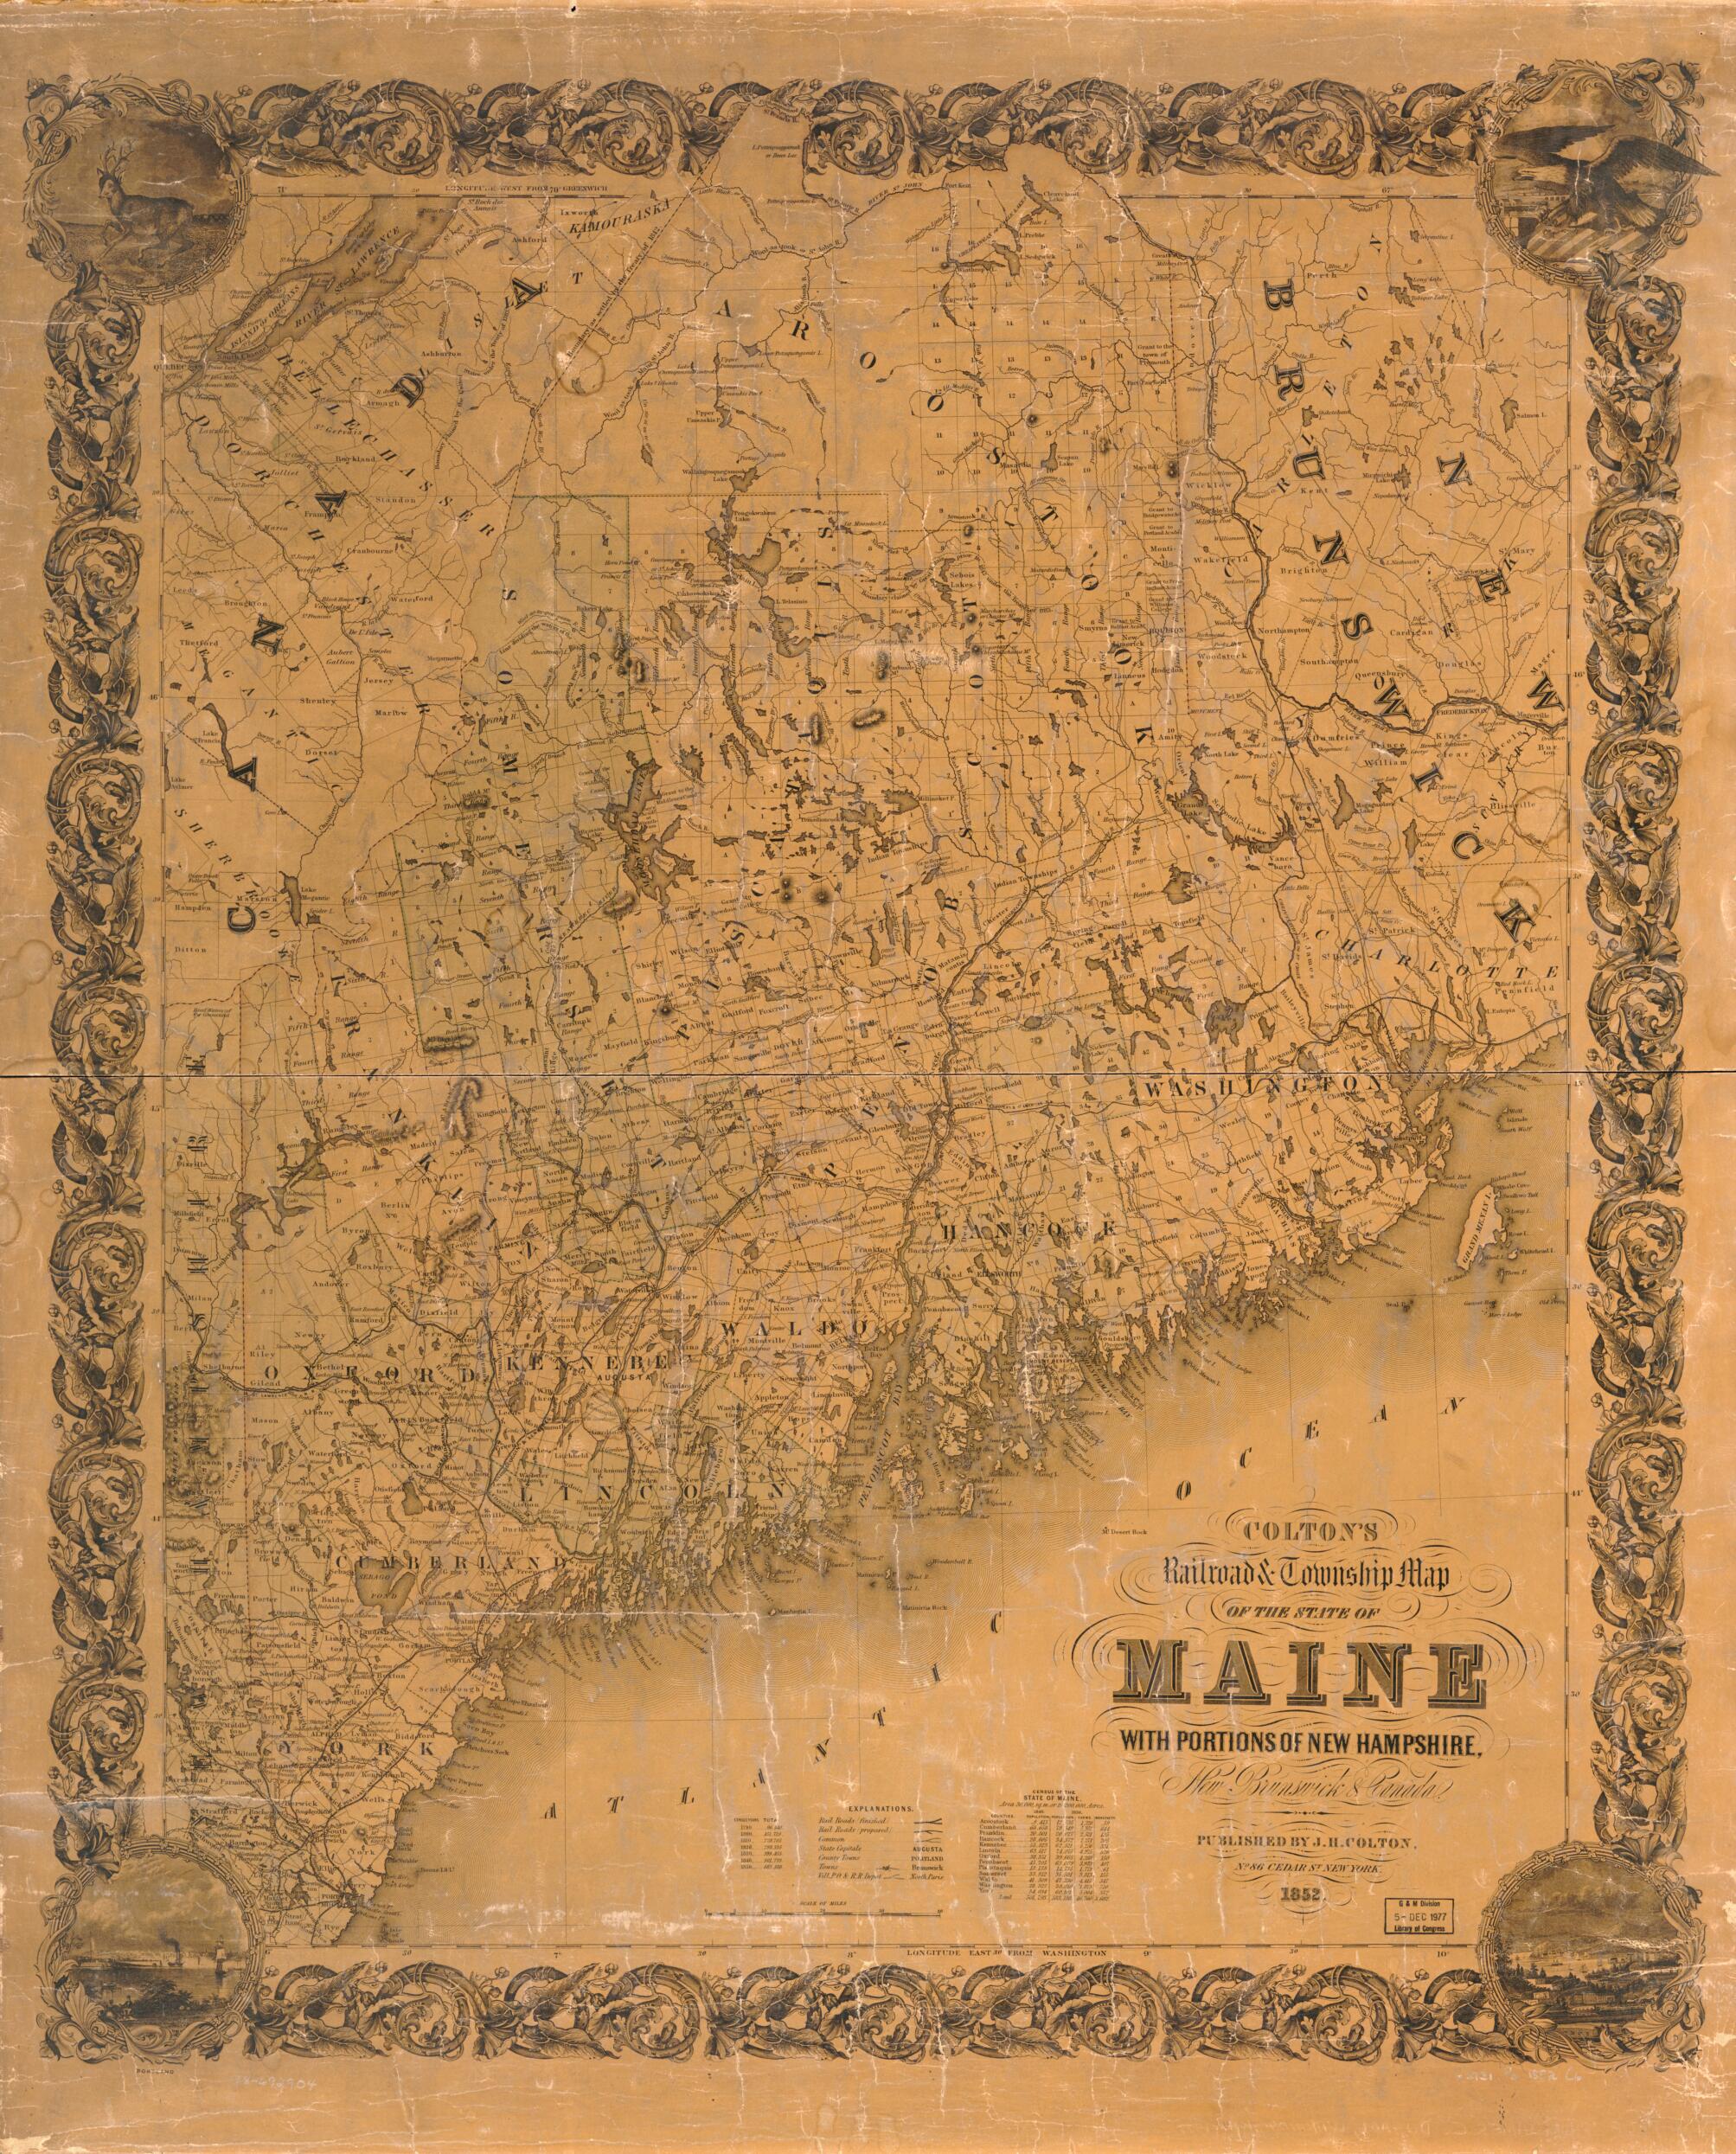 This old map of Colton&